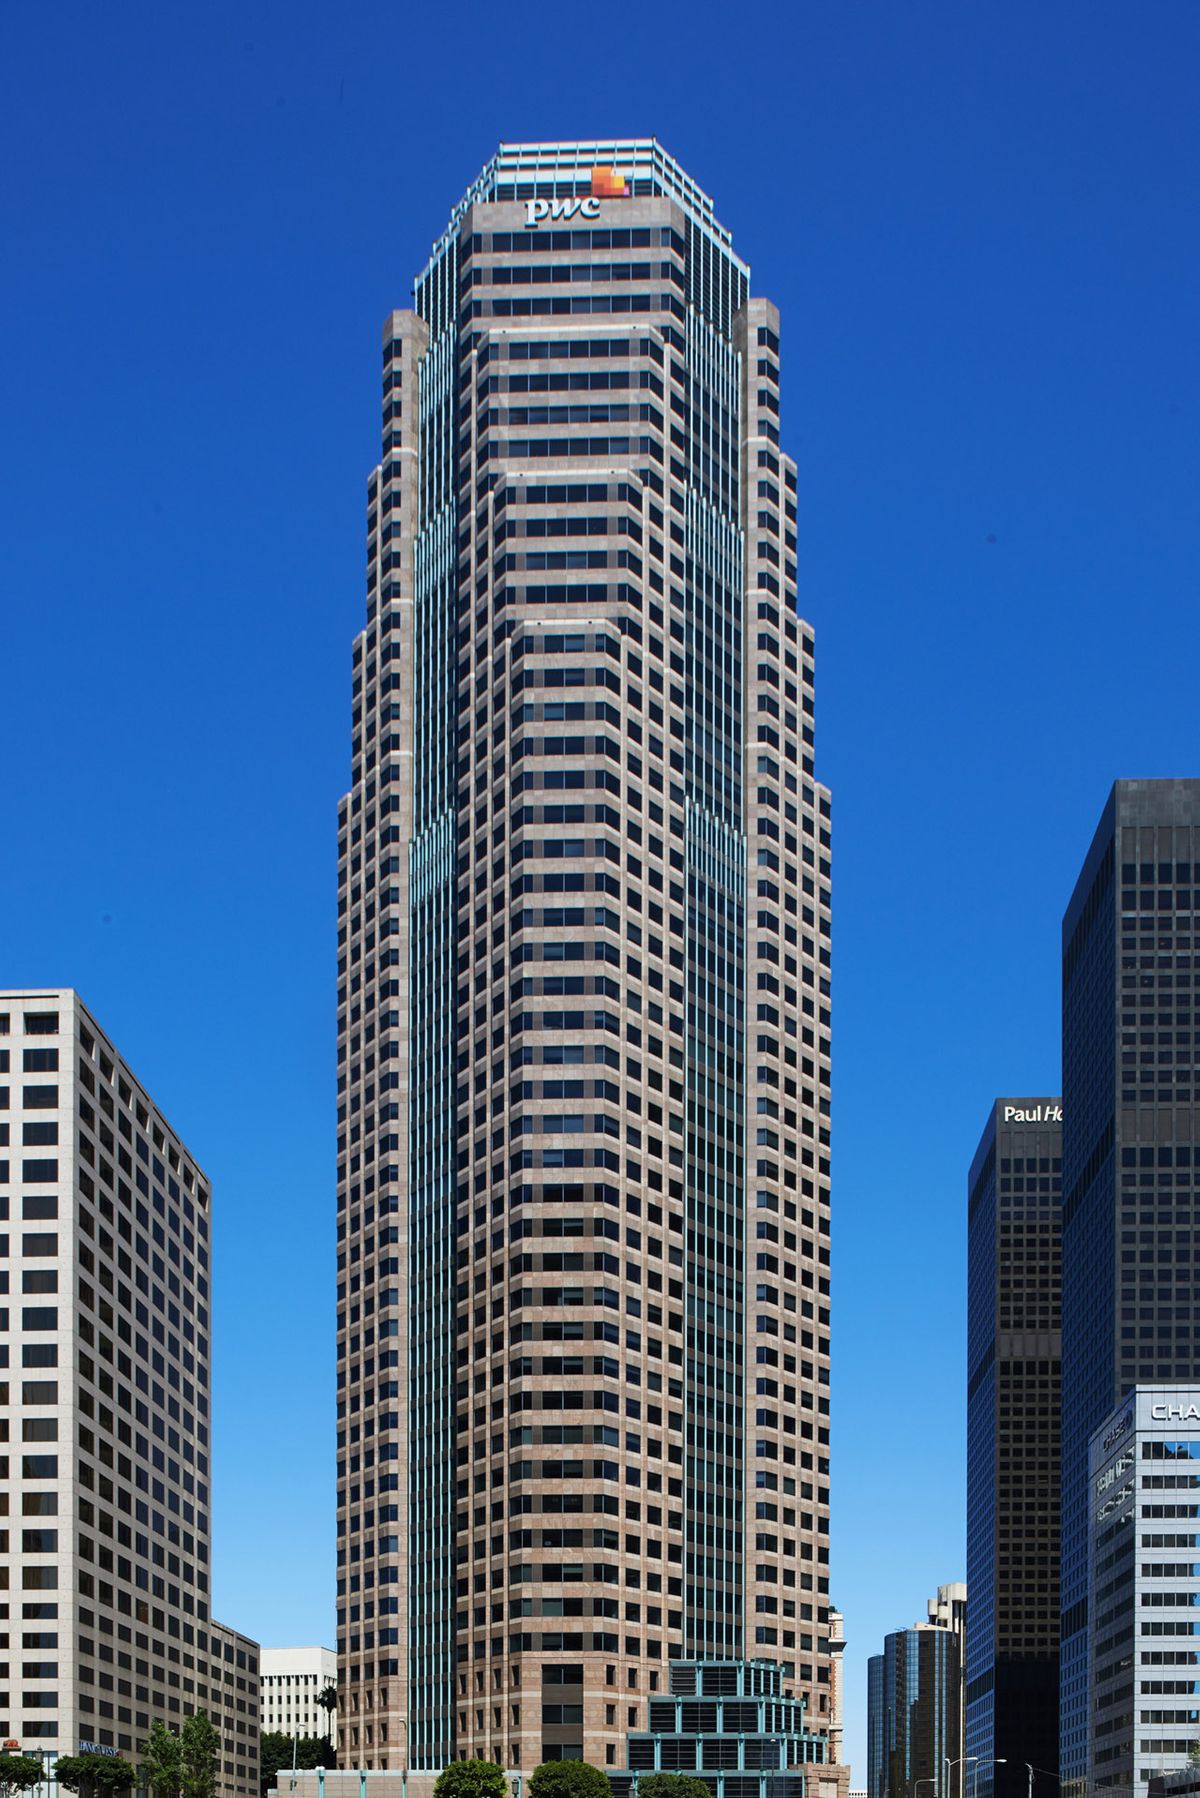 002 Commercial Architectural Photography Portfolio of Architectural Photographer Peter Christiansen Valli - PWC Tower, Los Angeles.jpg